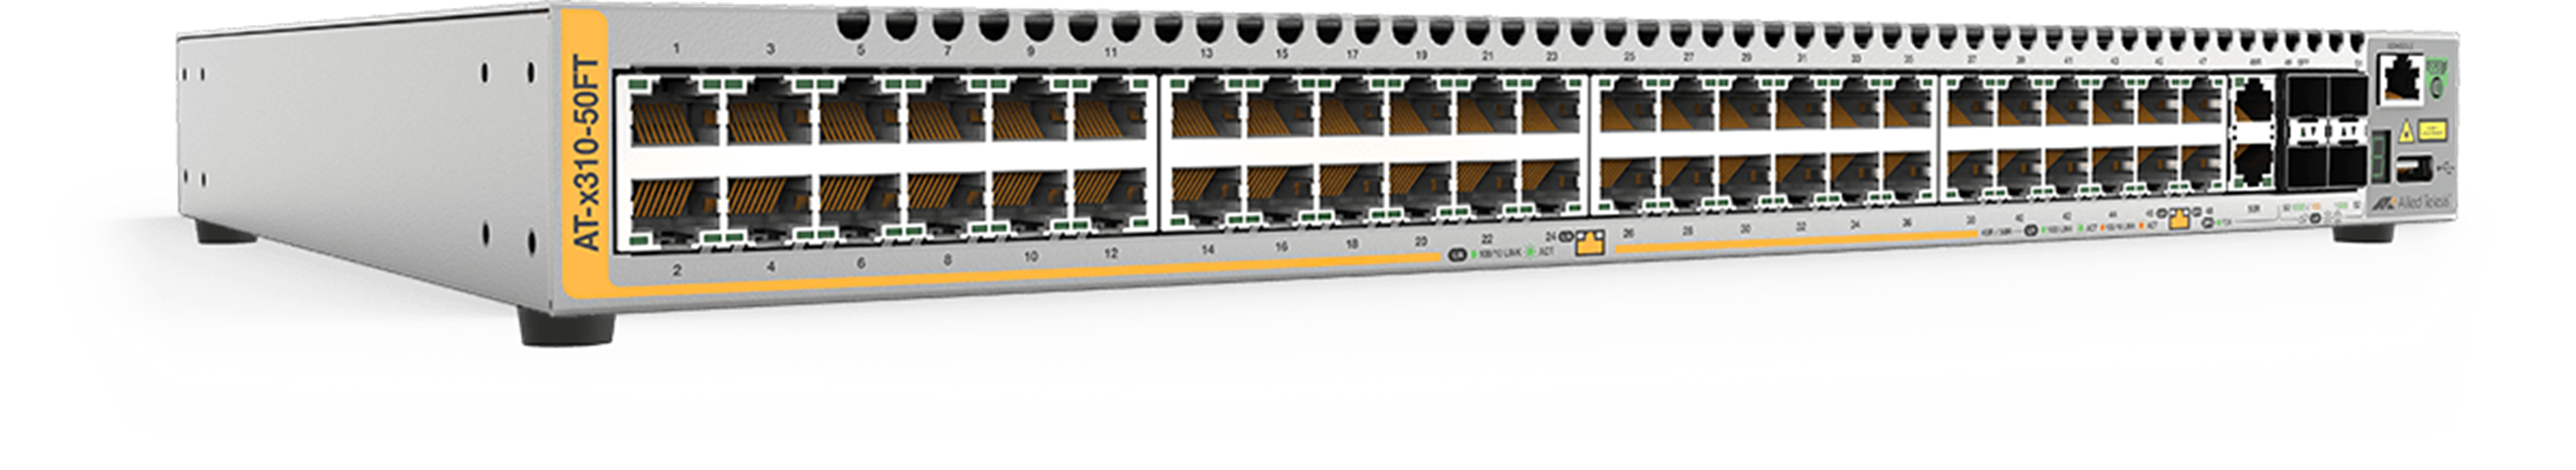 AT-X310 Series - Layer 2 Fast Ethernet Switch